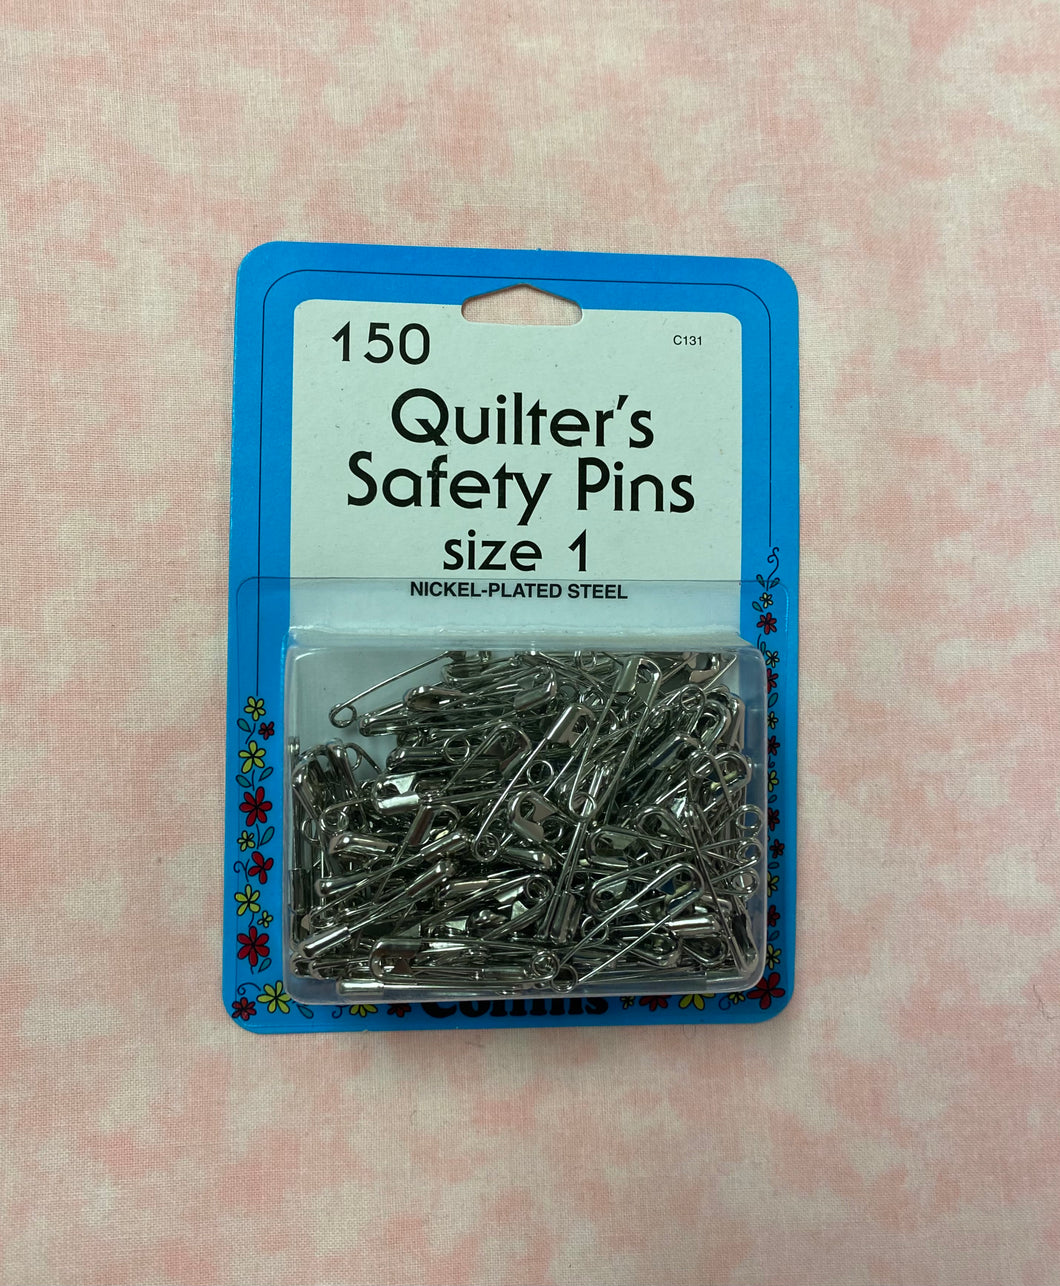 Quilter's Safety Pins n118